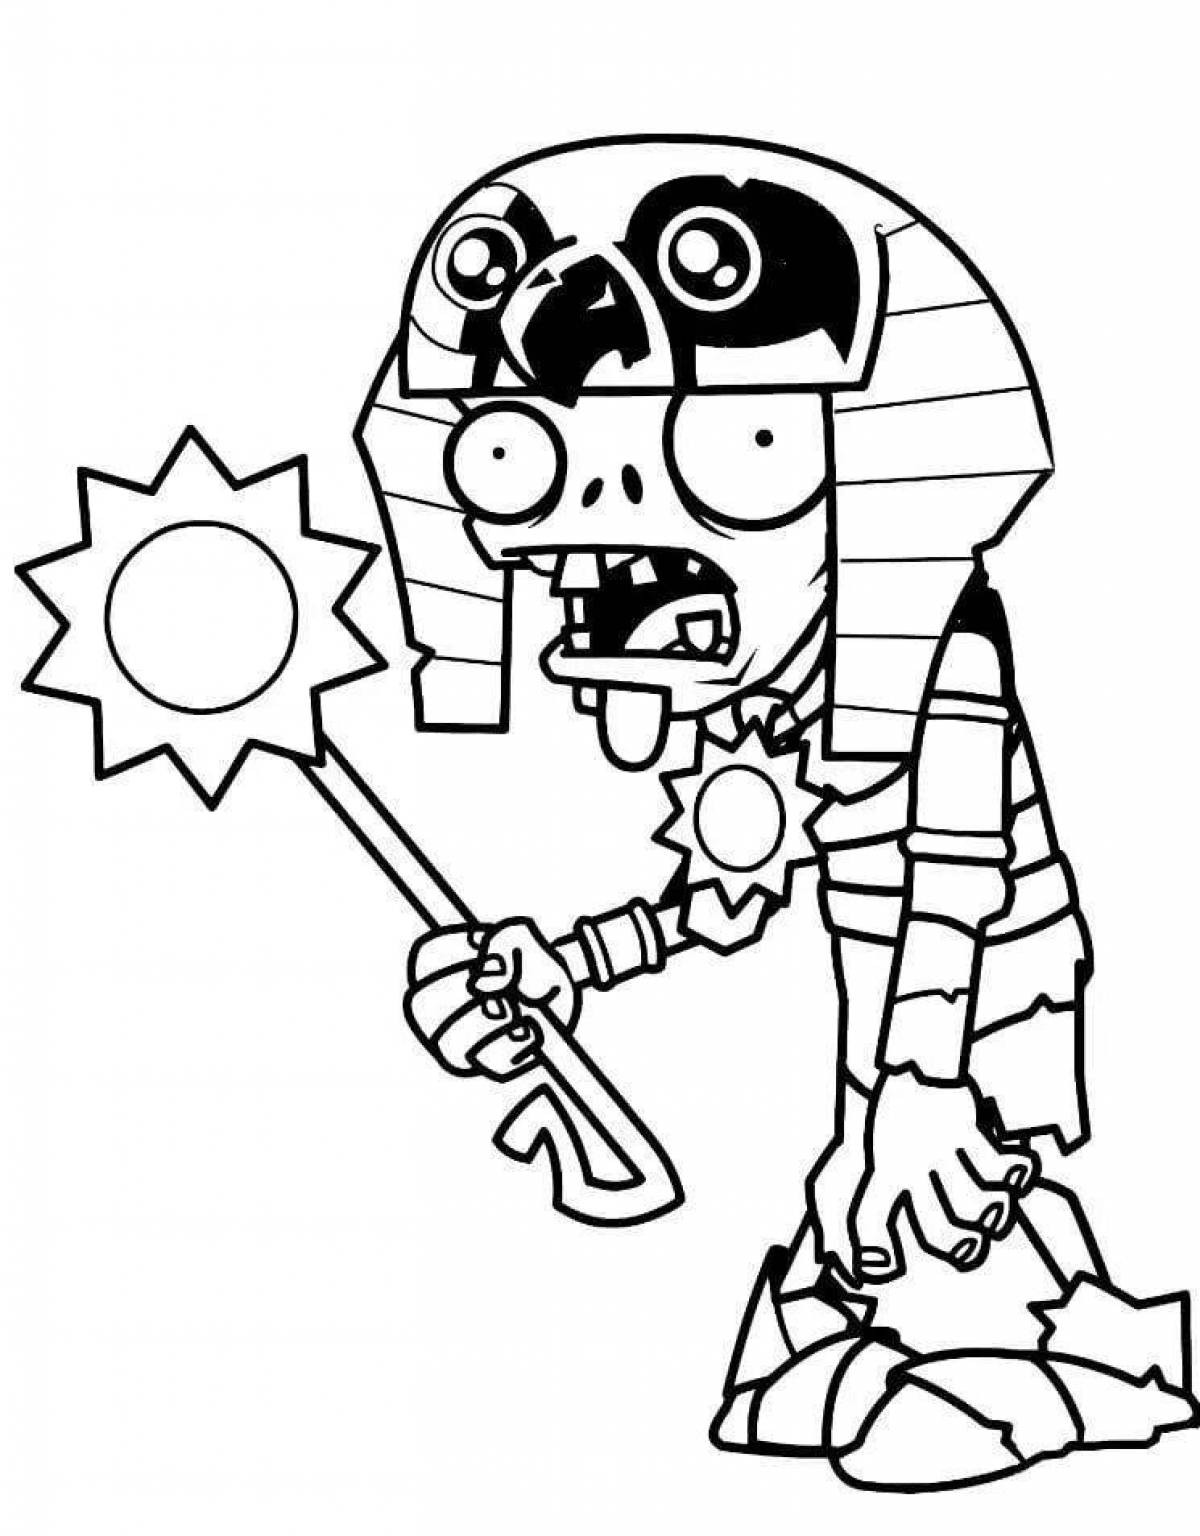 Fascinating Zombies vs. Plants 3 coloring book